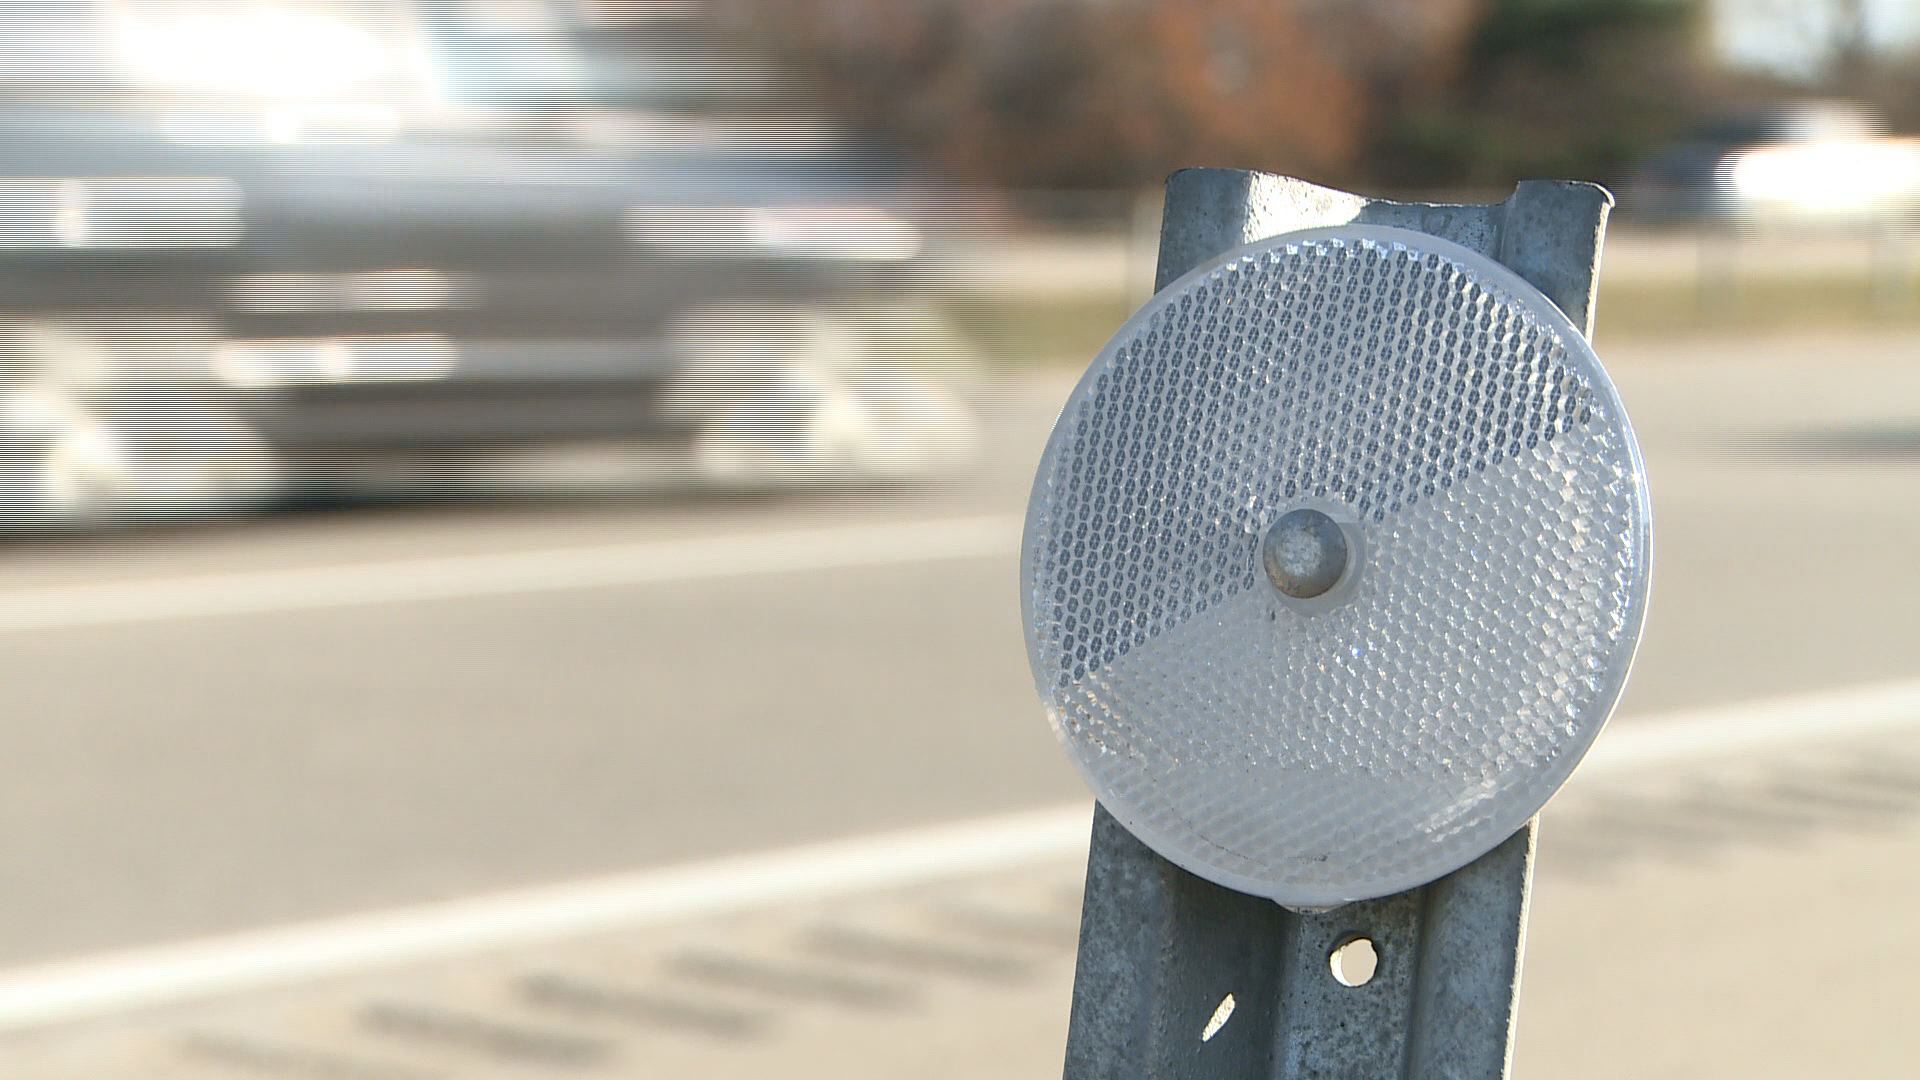 Michigan bill requires drivers use blinkers when changing lanes